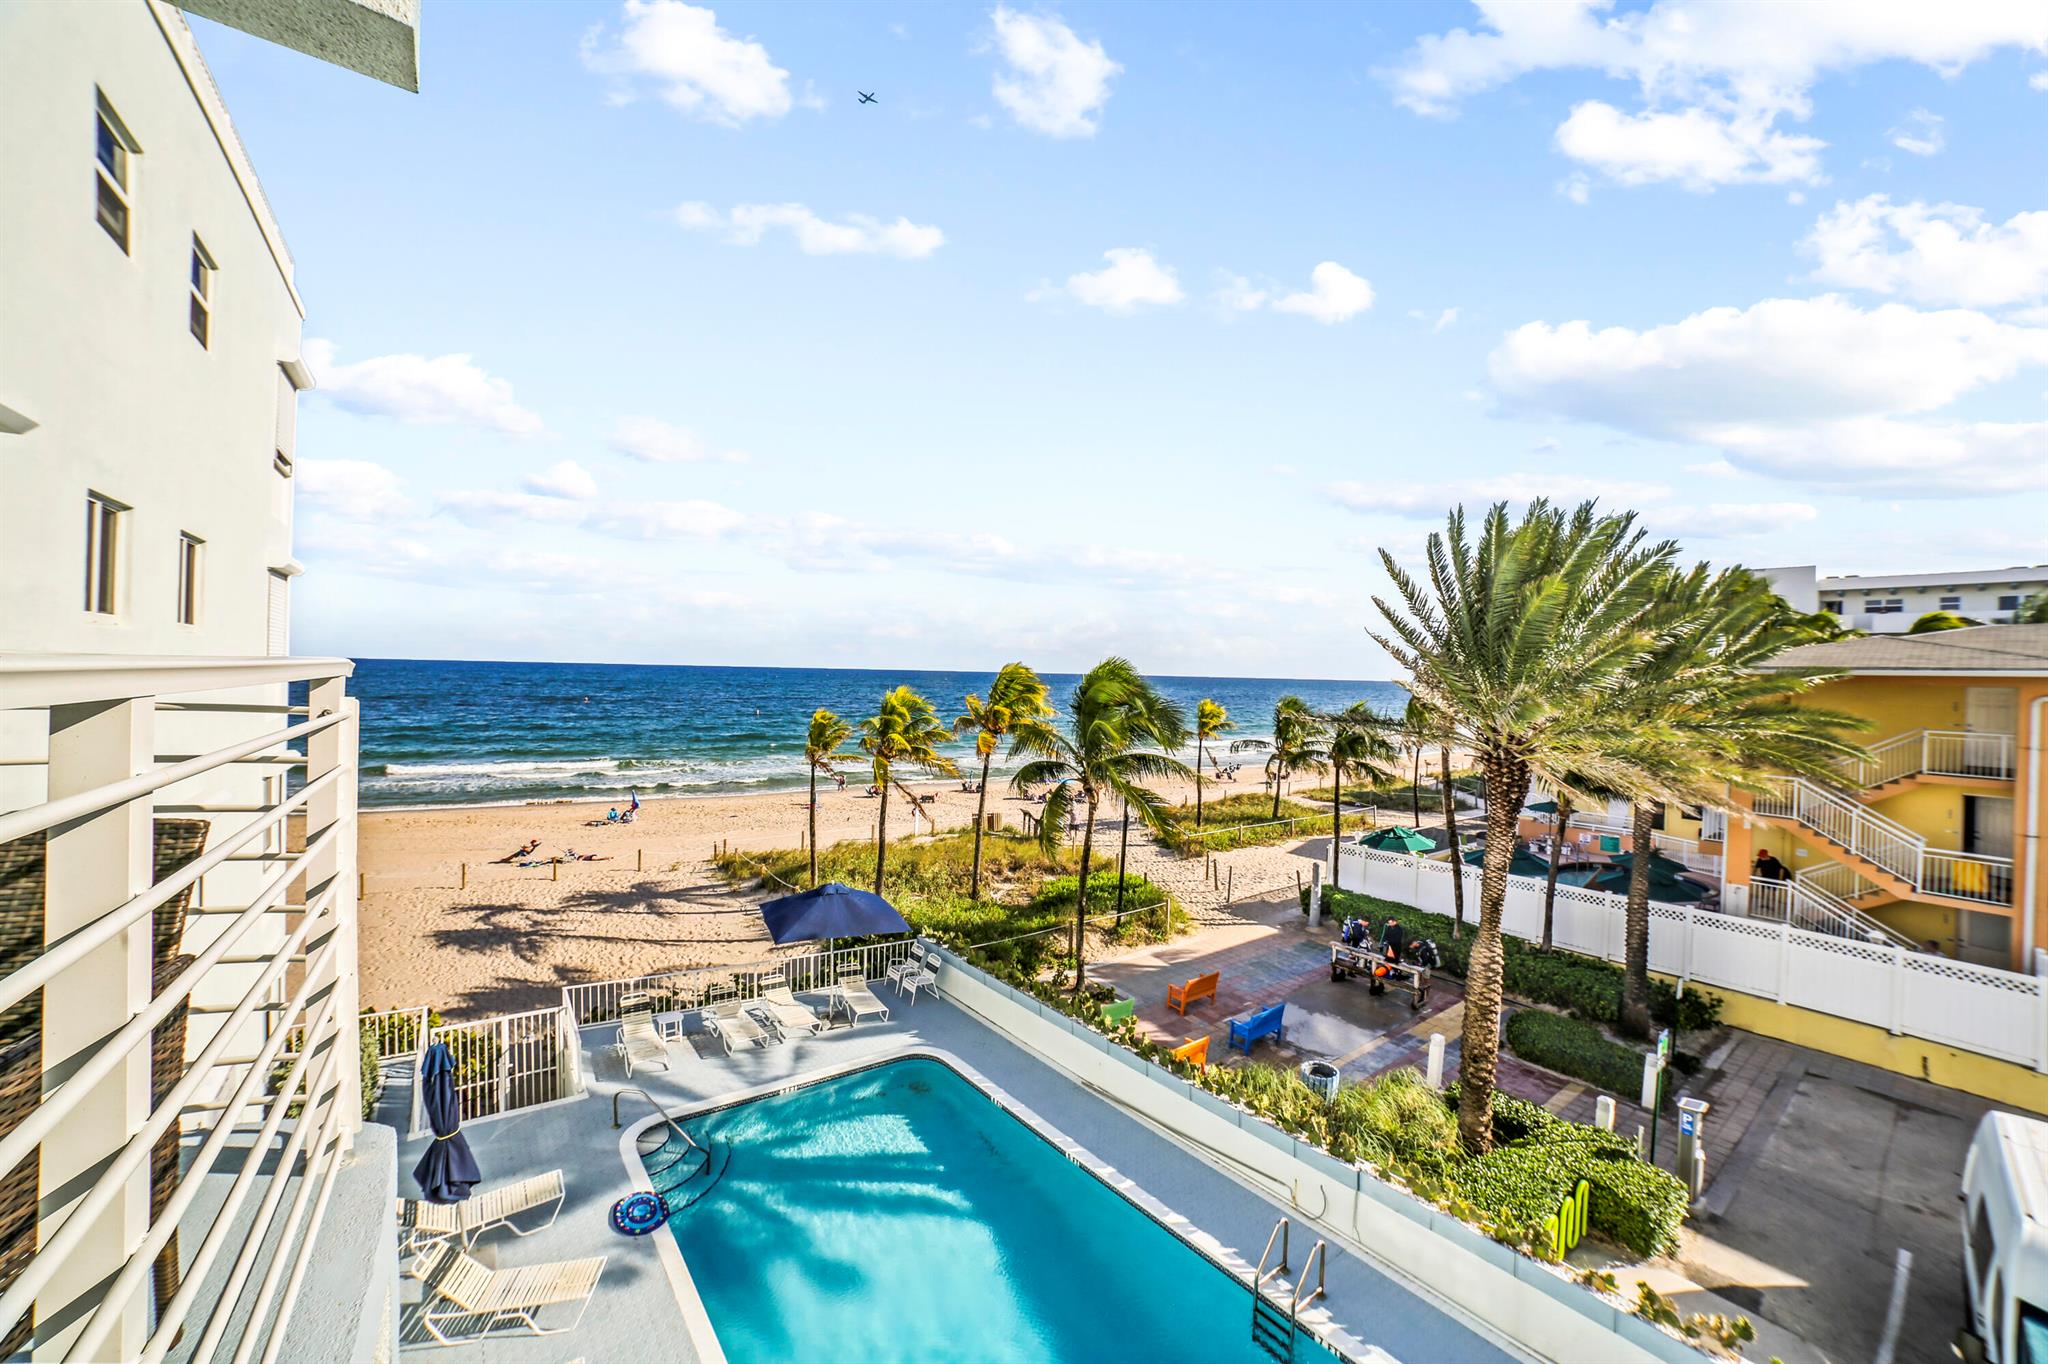 View Lauderdale By The Sea, FL 33308 co-op property